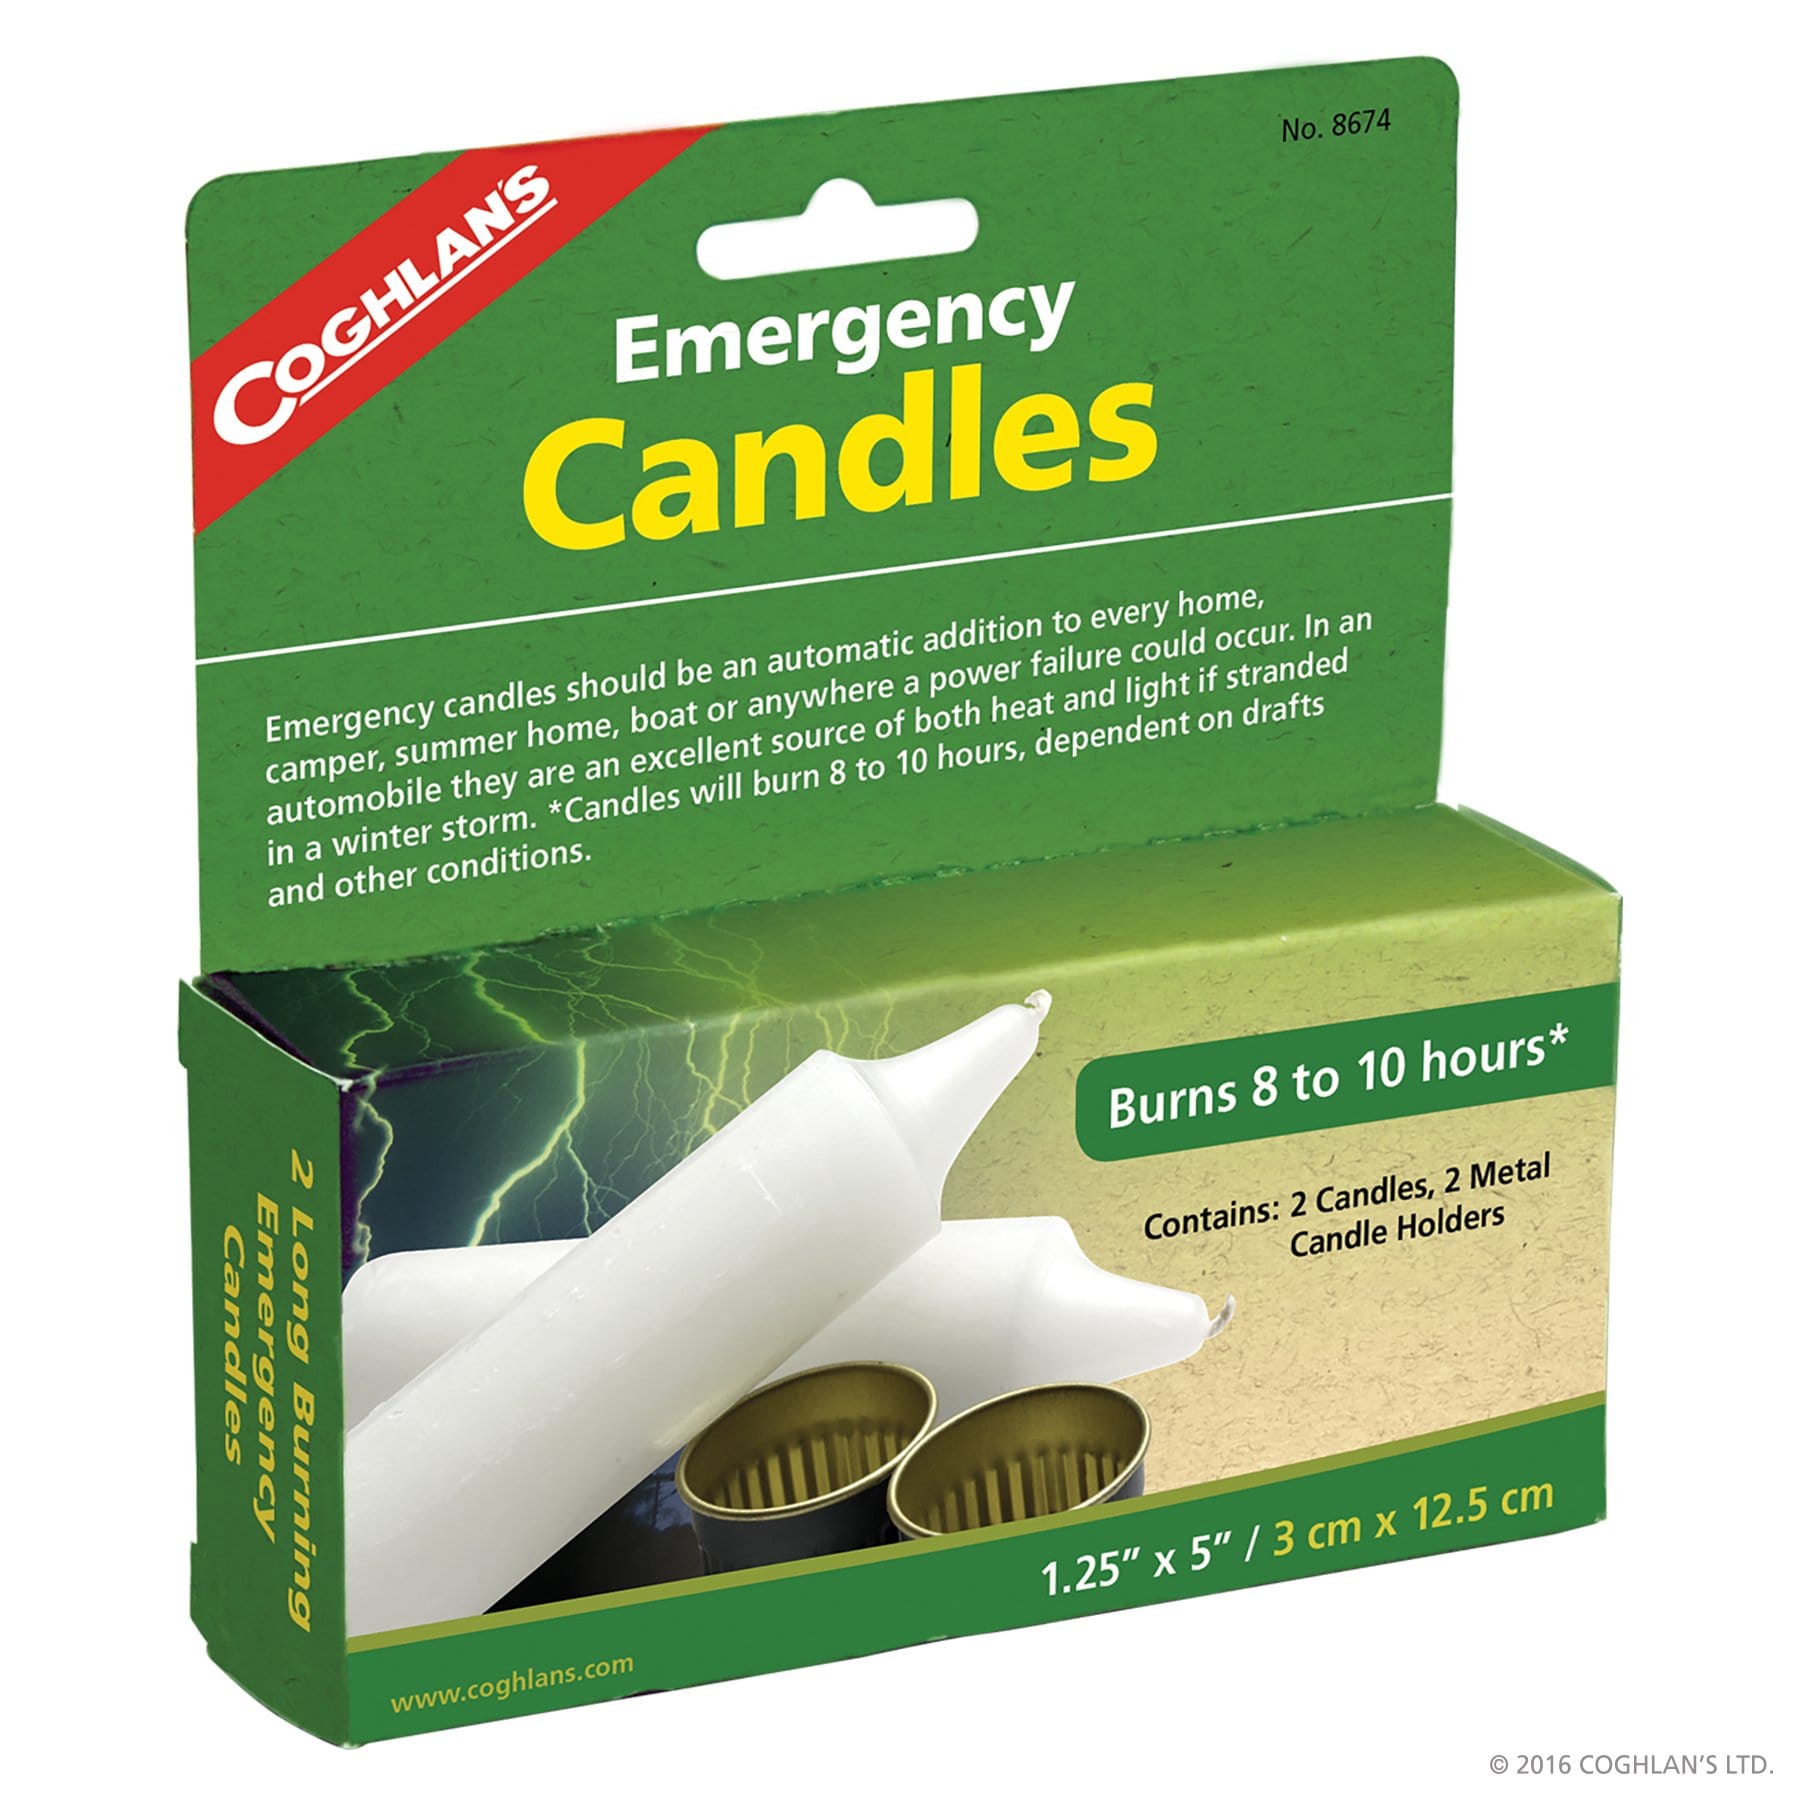 Candles as an Emergency Fuel Source for Warmth, Light, and Cooking